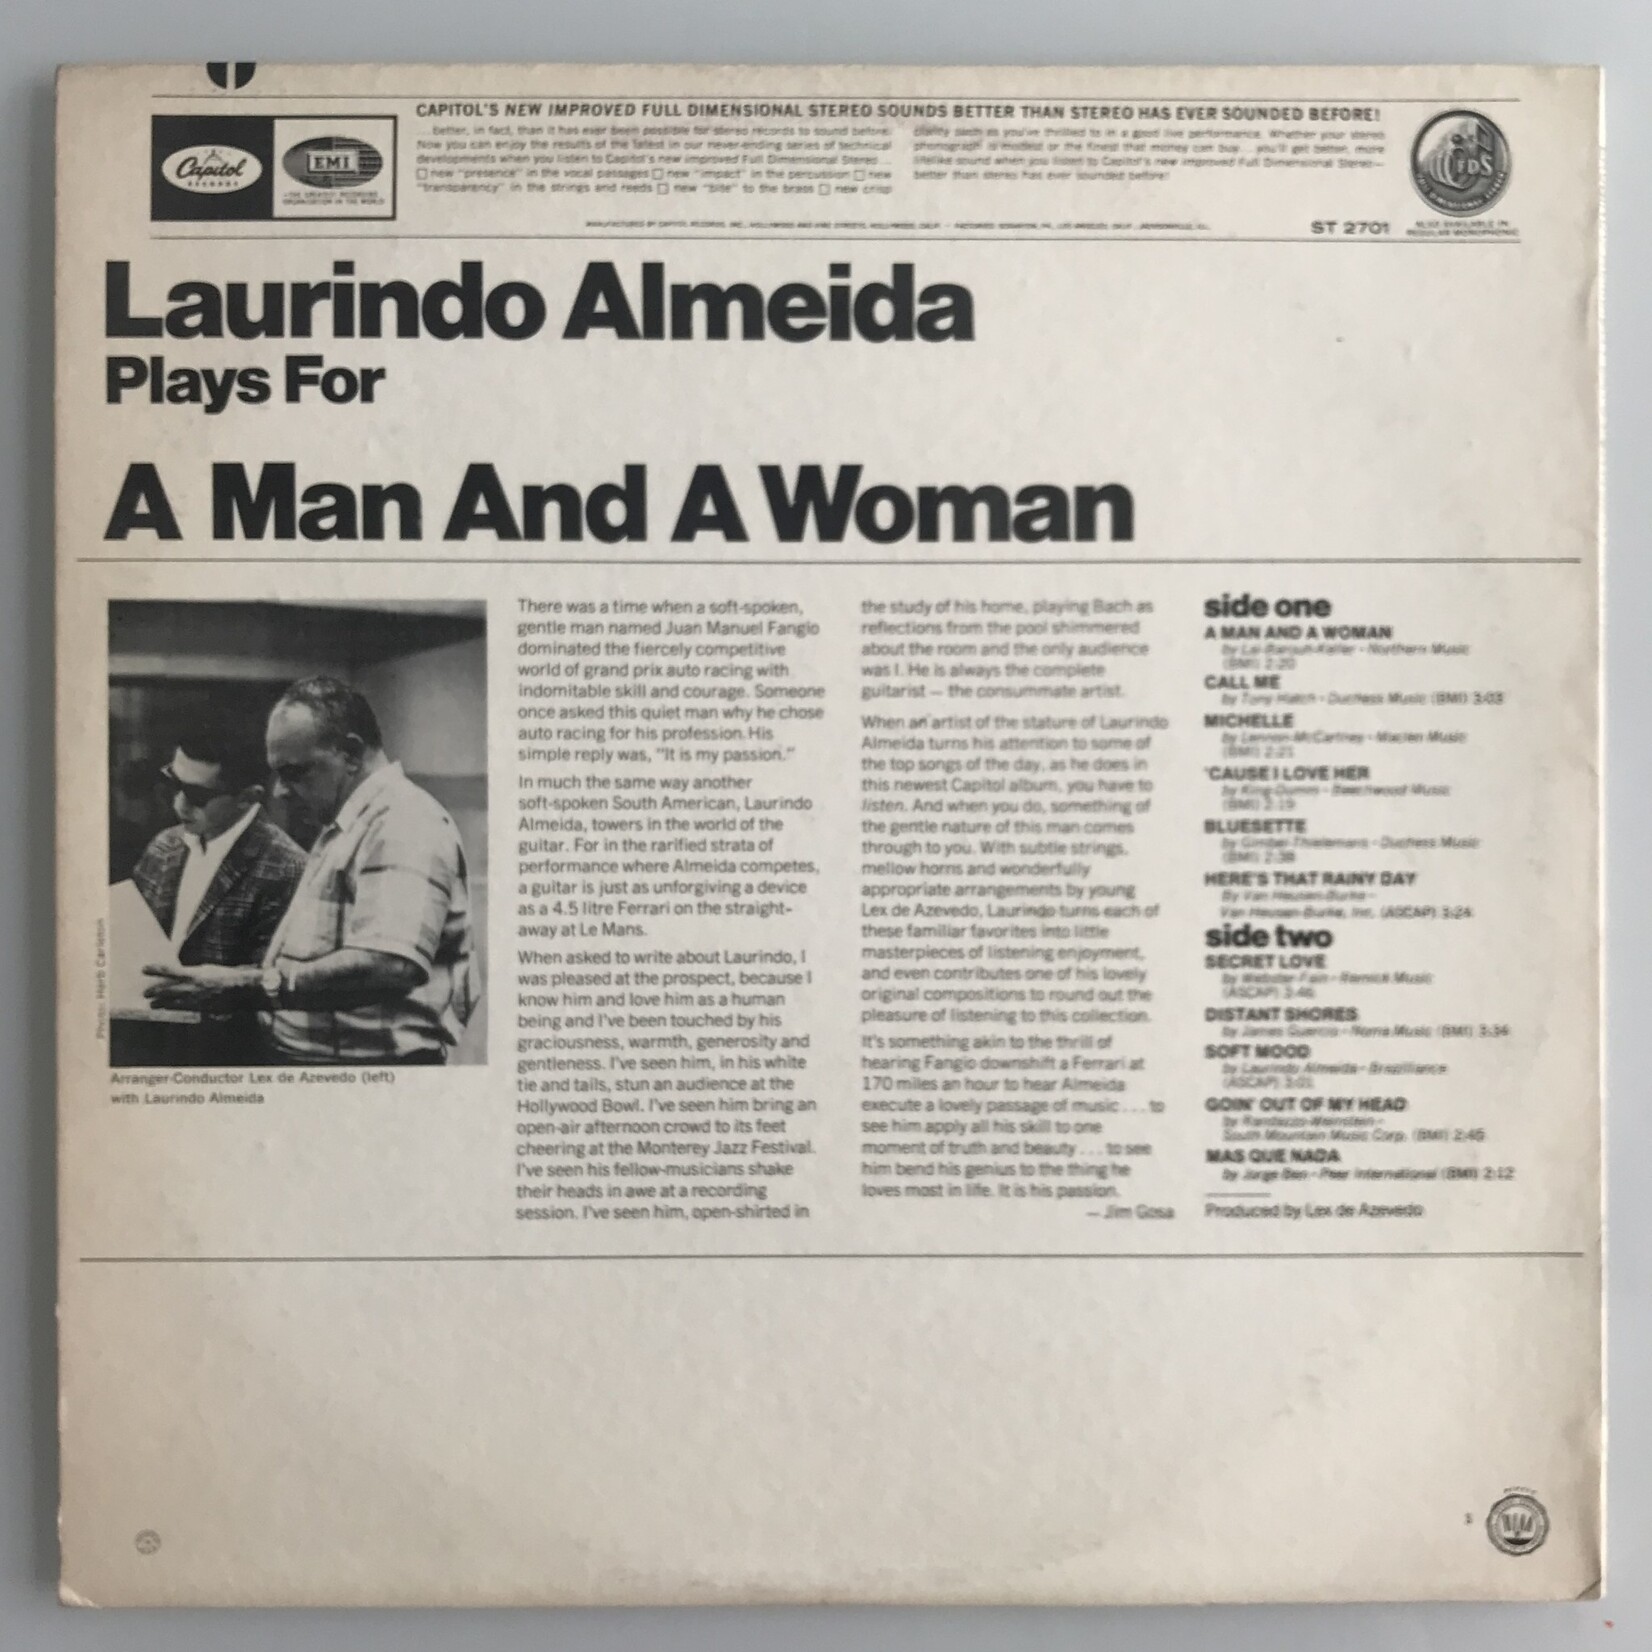 Laurindo Almeida - A Man And A Woman - Vinyl LP (USED)